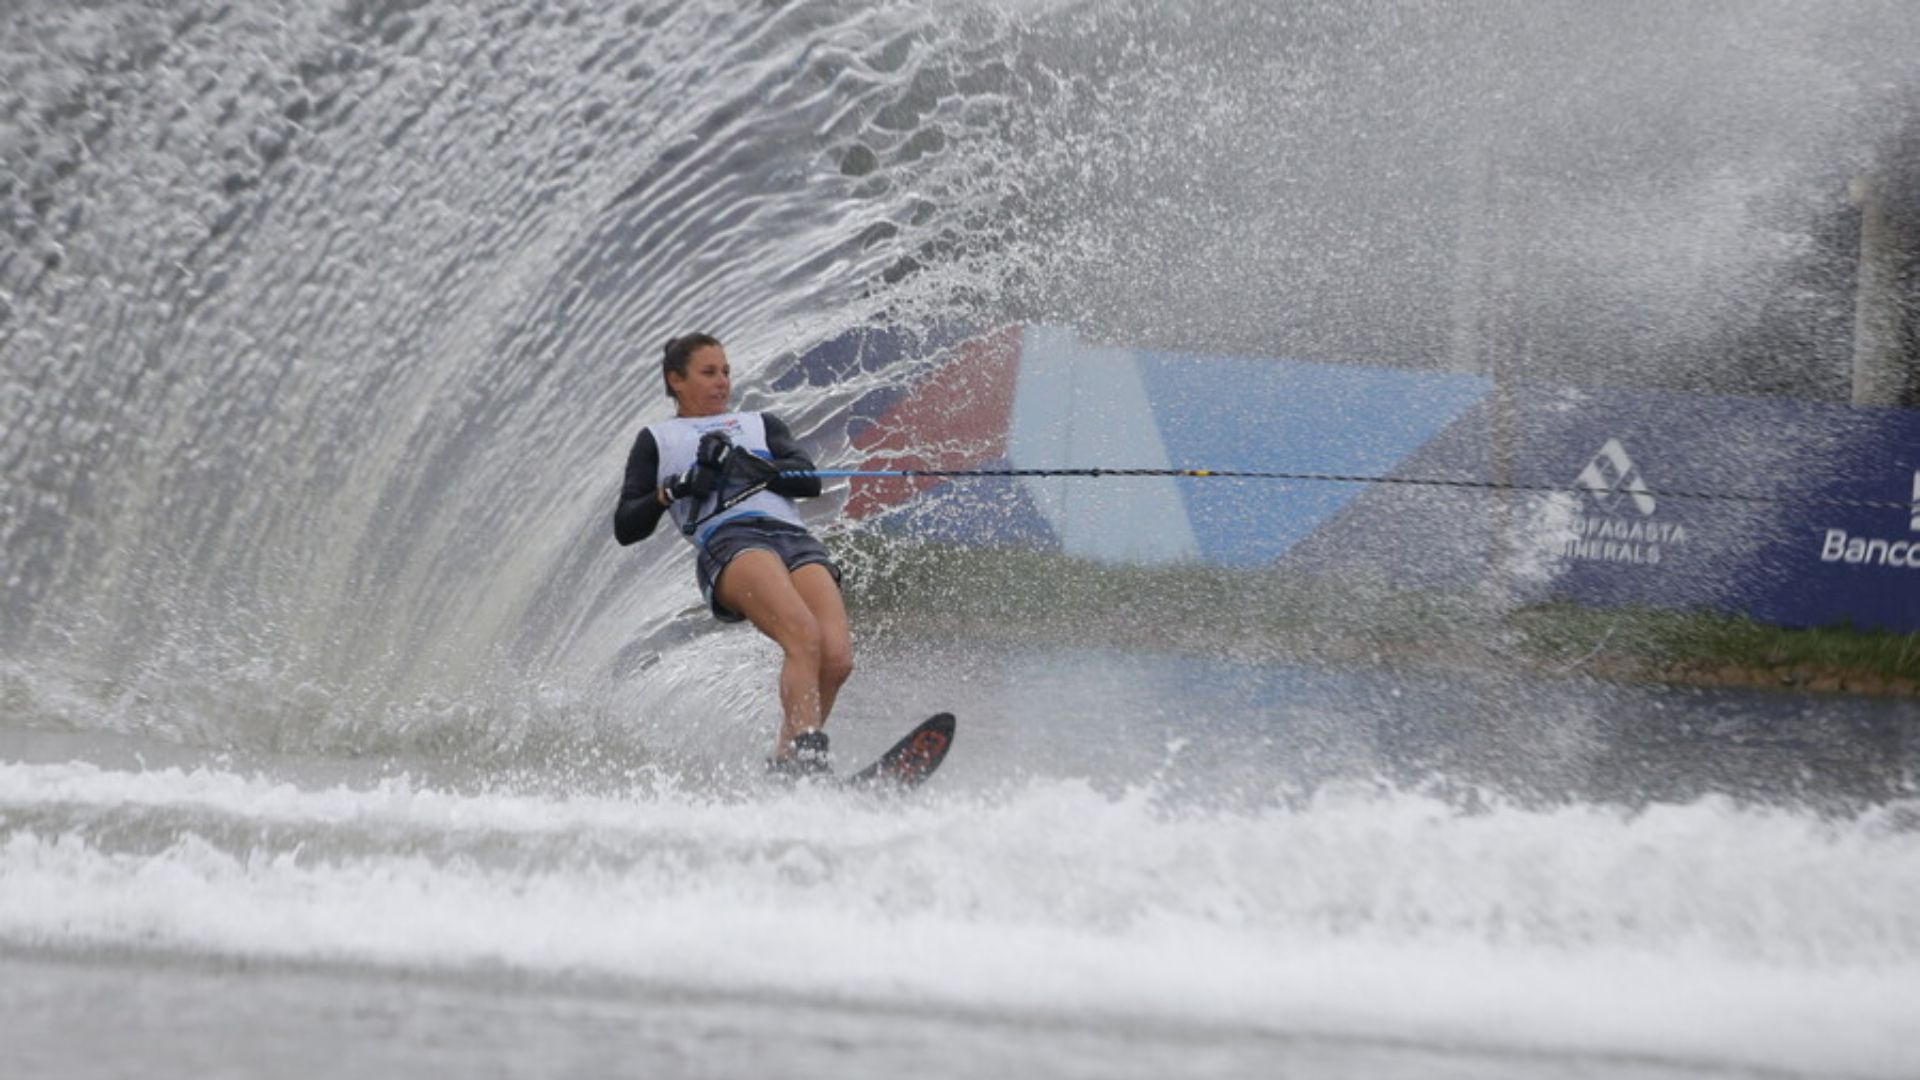 Gold by Minutes: Chilean Agustina Varas Takes Silver in Water Skiing